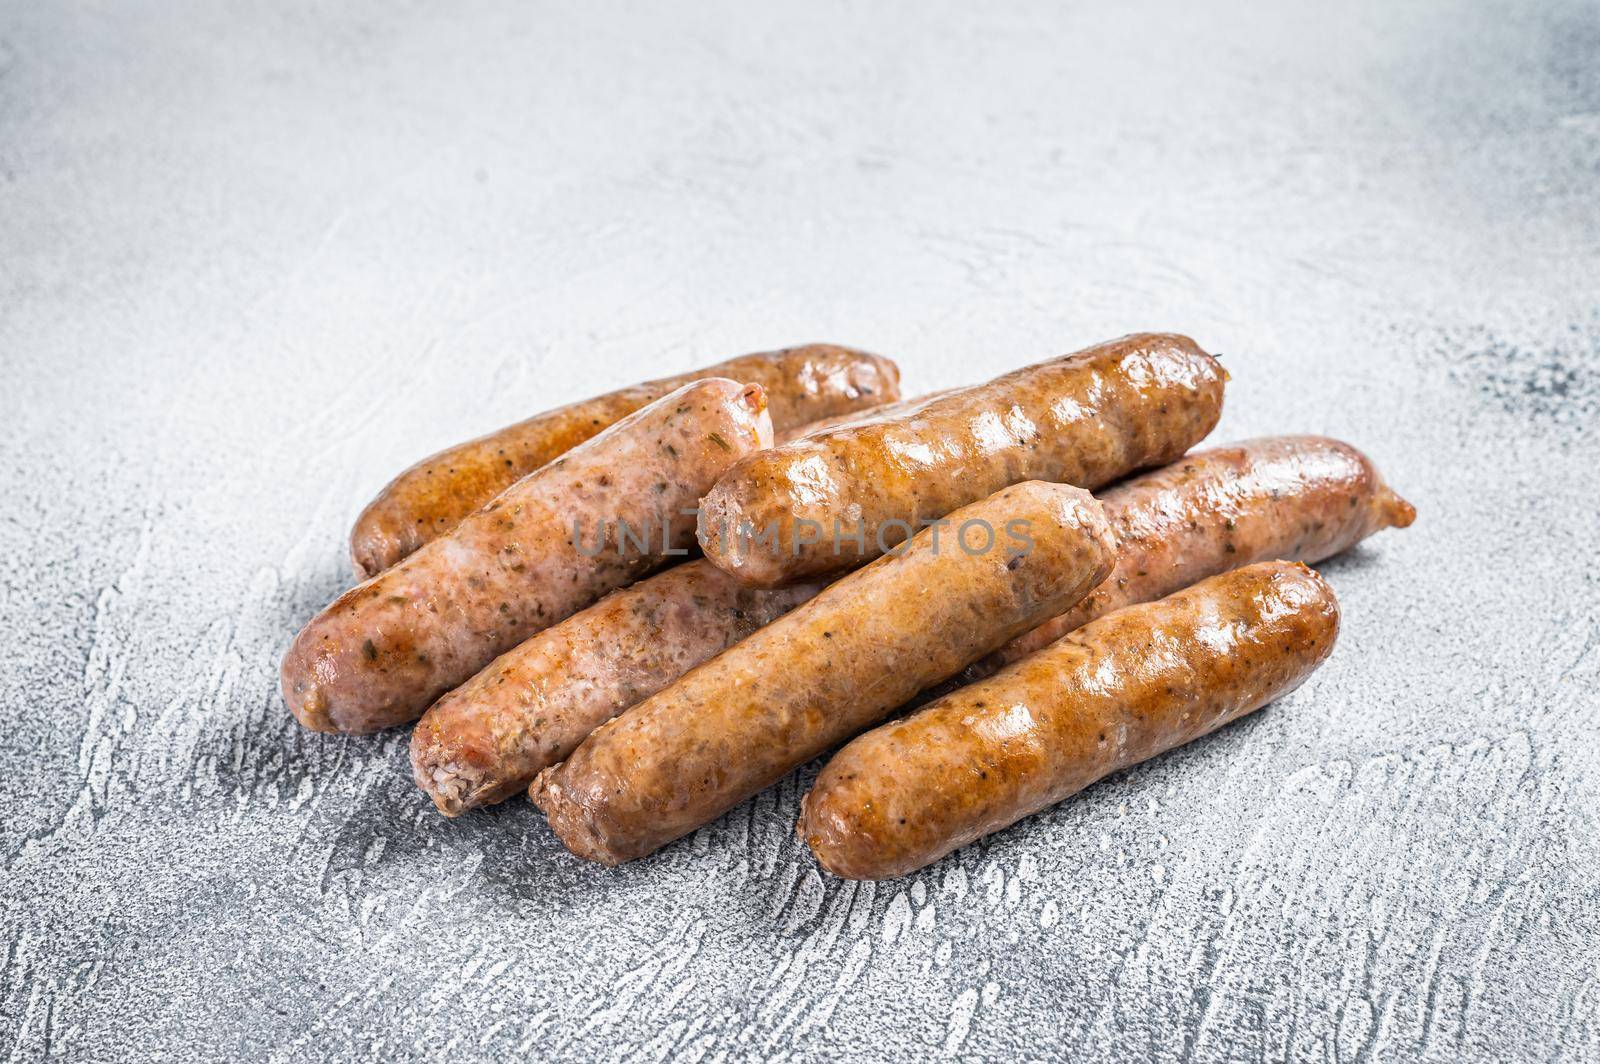 Roasted Bratwurst Hot Dog sausages. White background. Top View by Composter